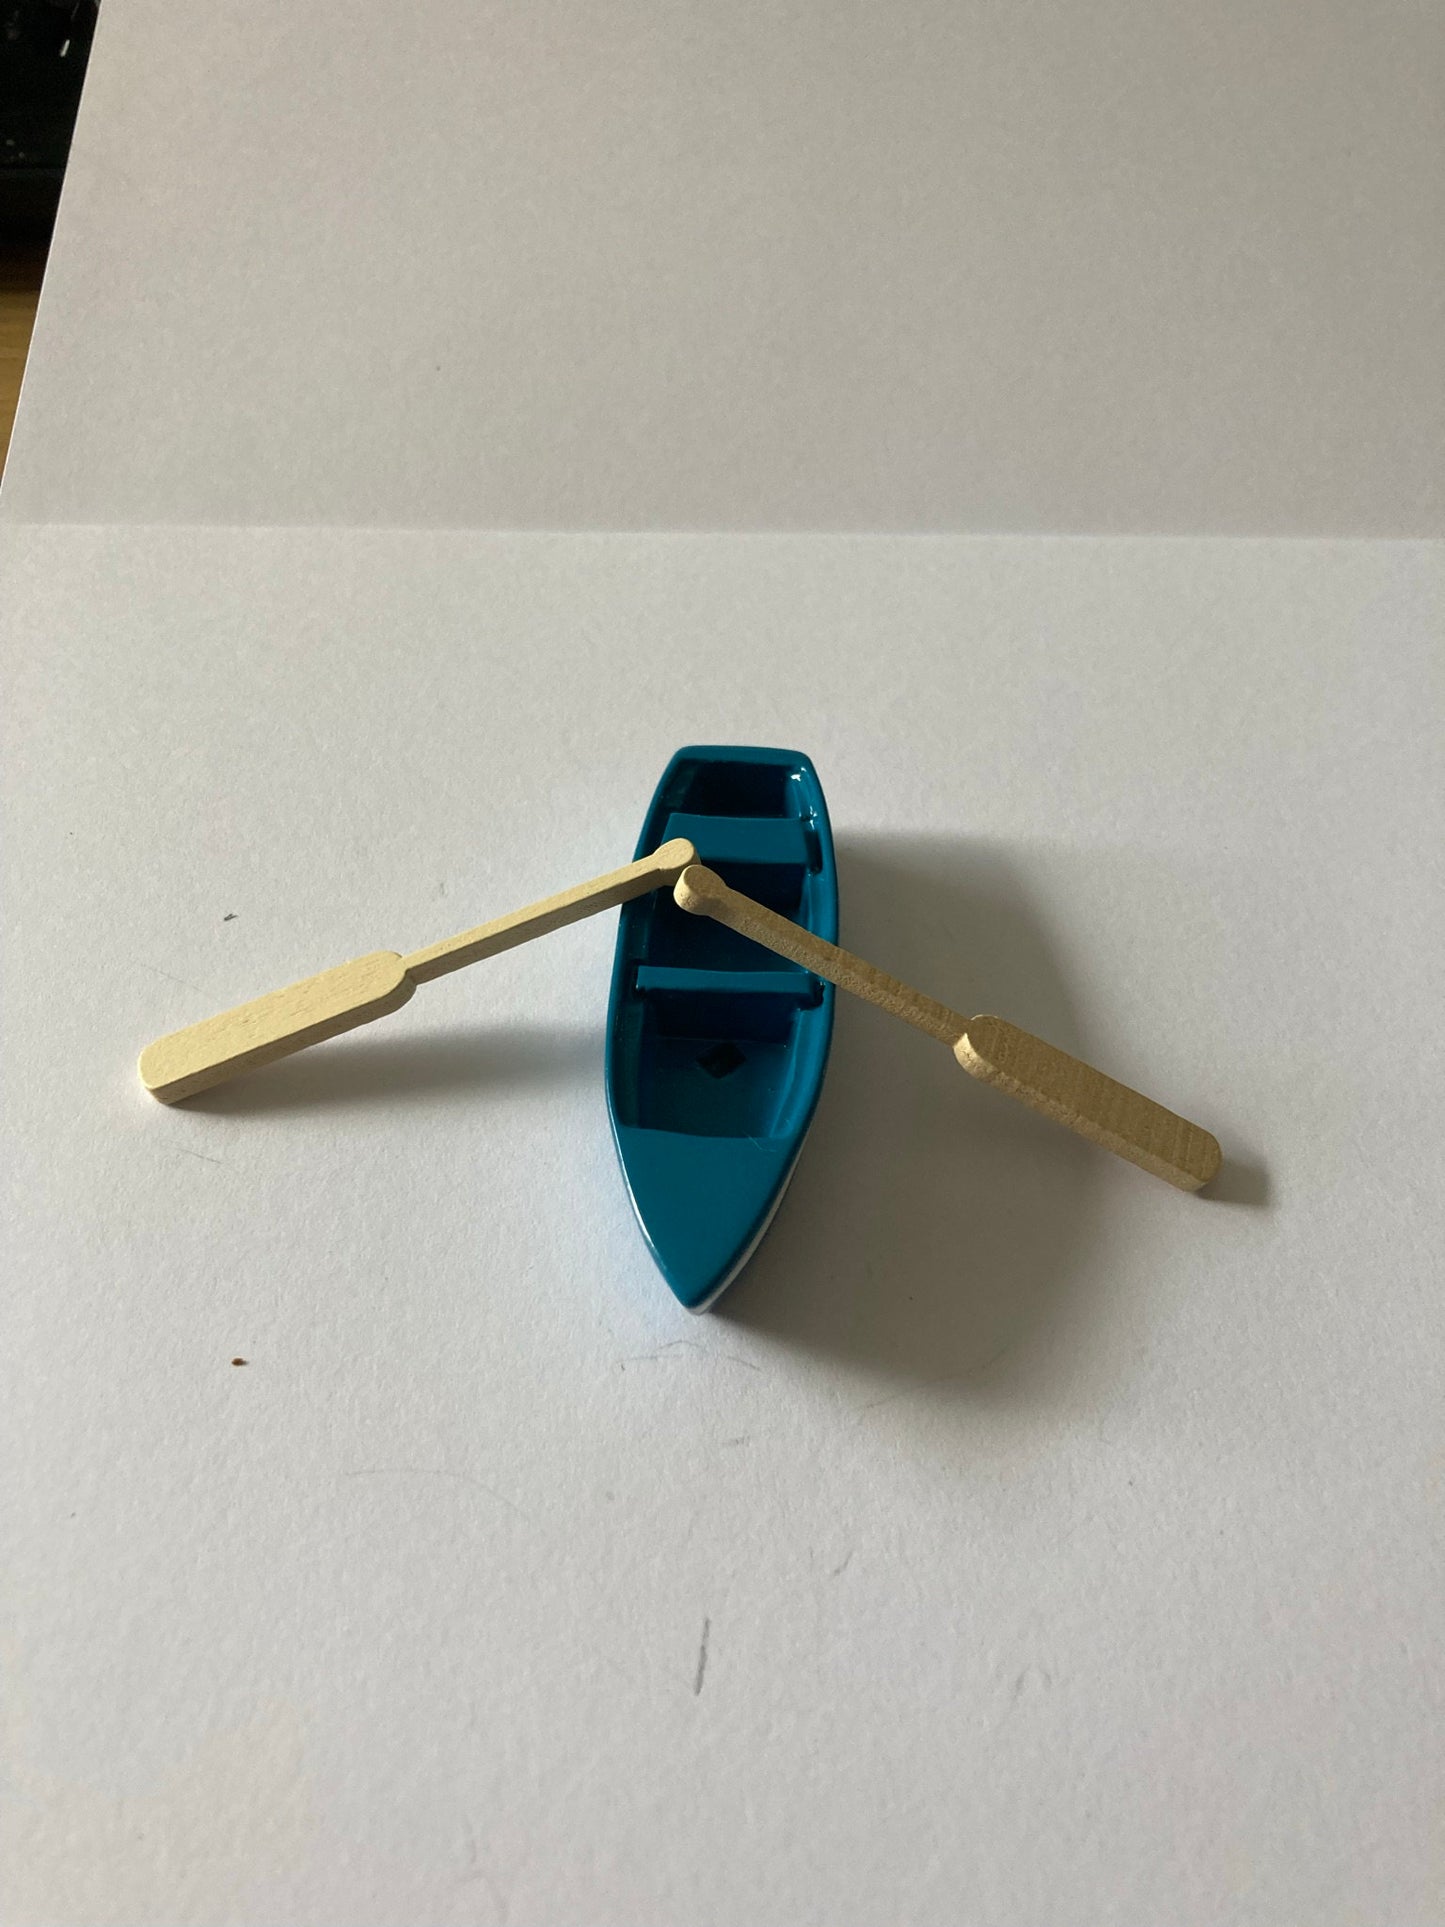 6-7cm miniature blue sea rowing boat and 2 oars seaside cake topper decoration